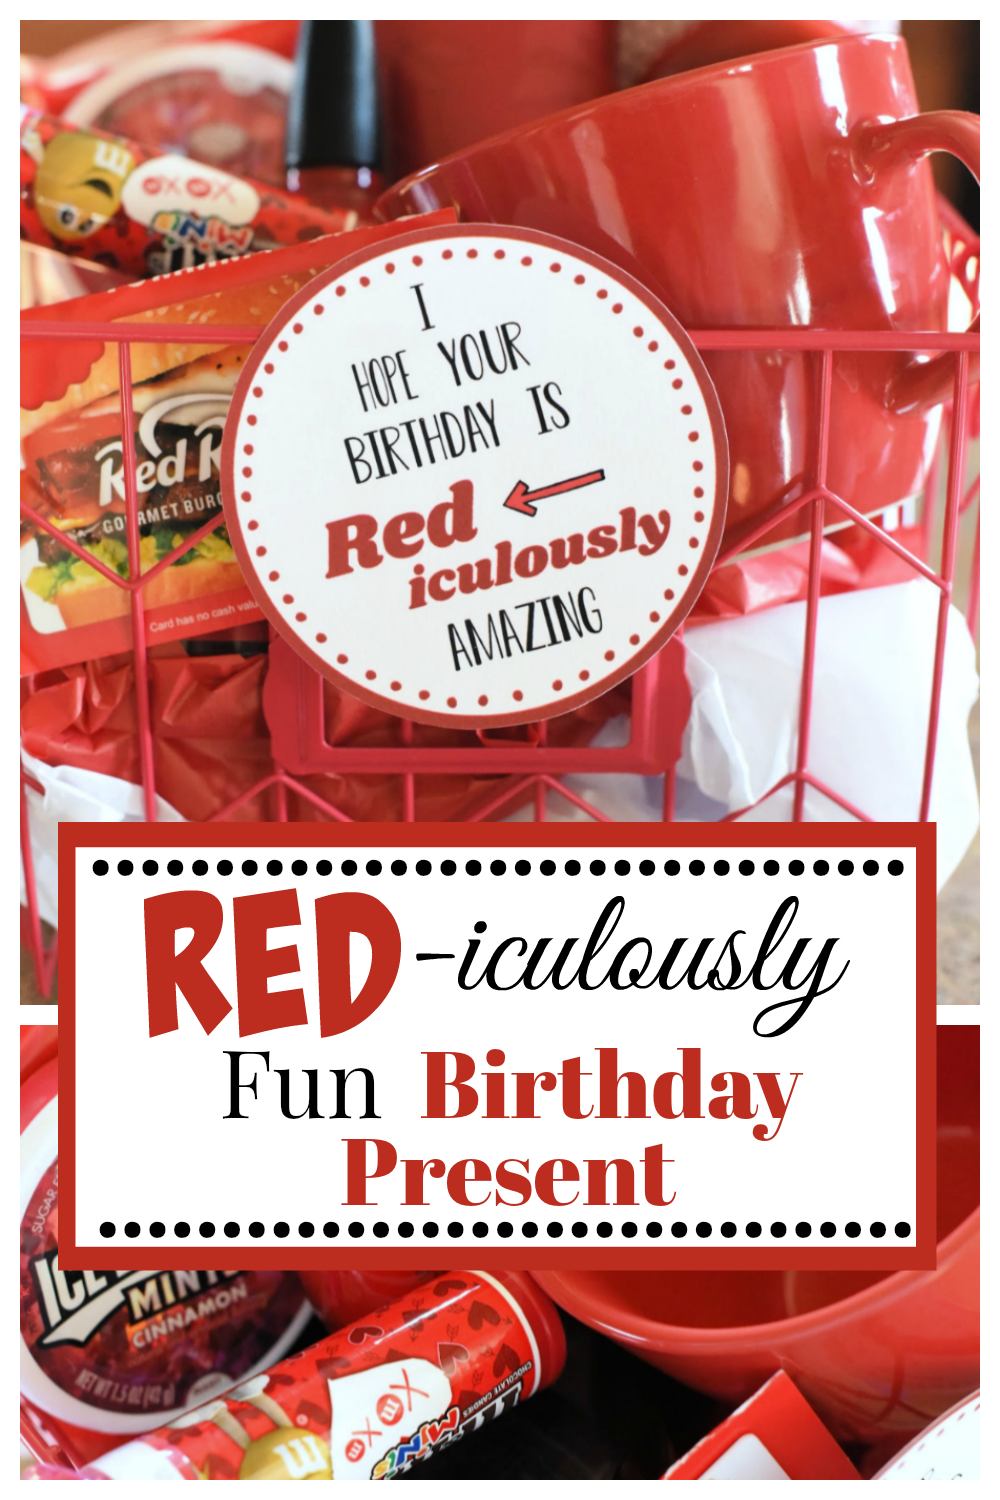 This is a red-iculously fun birthday gift that is perfect for anyone. We love this simple birthday gift idea, and you will too. #birthdaygift #birthdaypresent #birthdayidea #gifts #fungiftideas #funbirthdaypresents